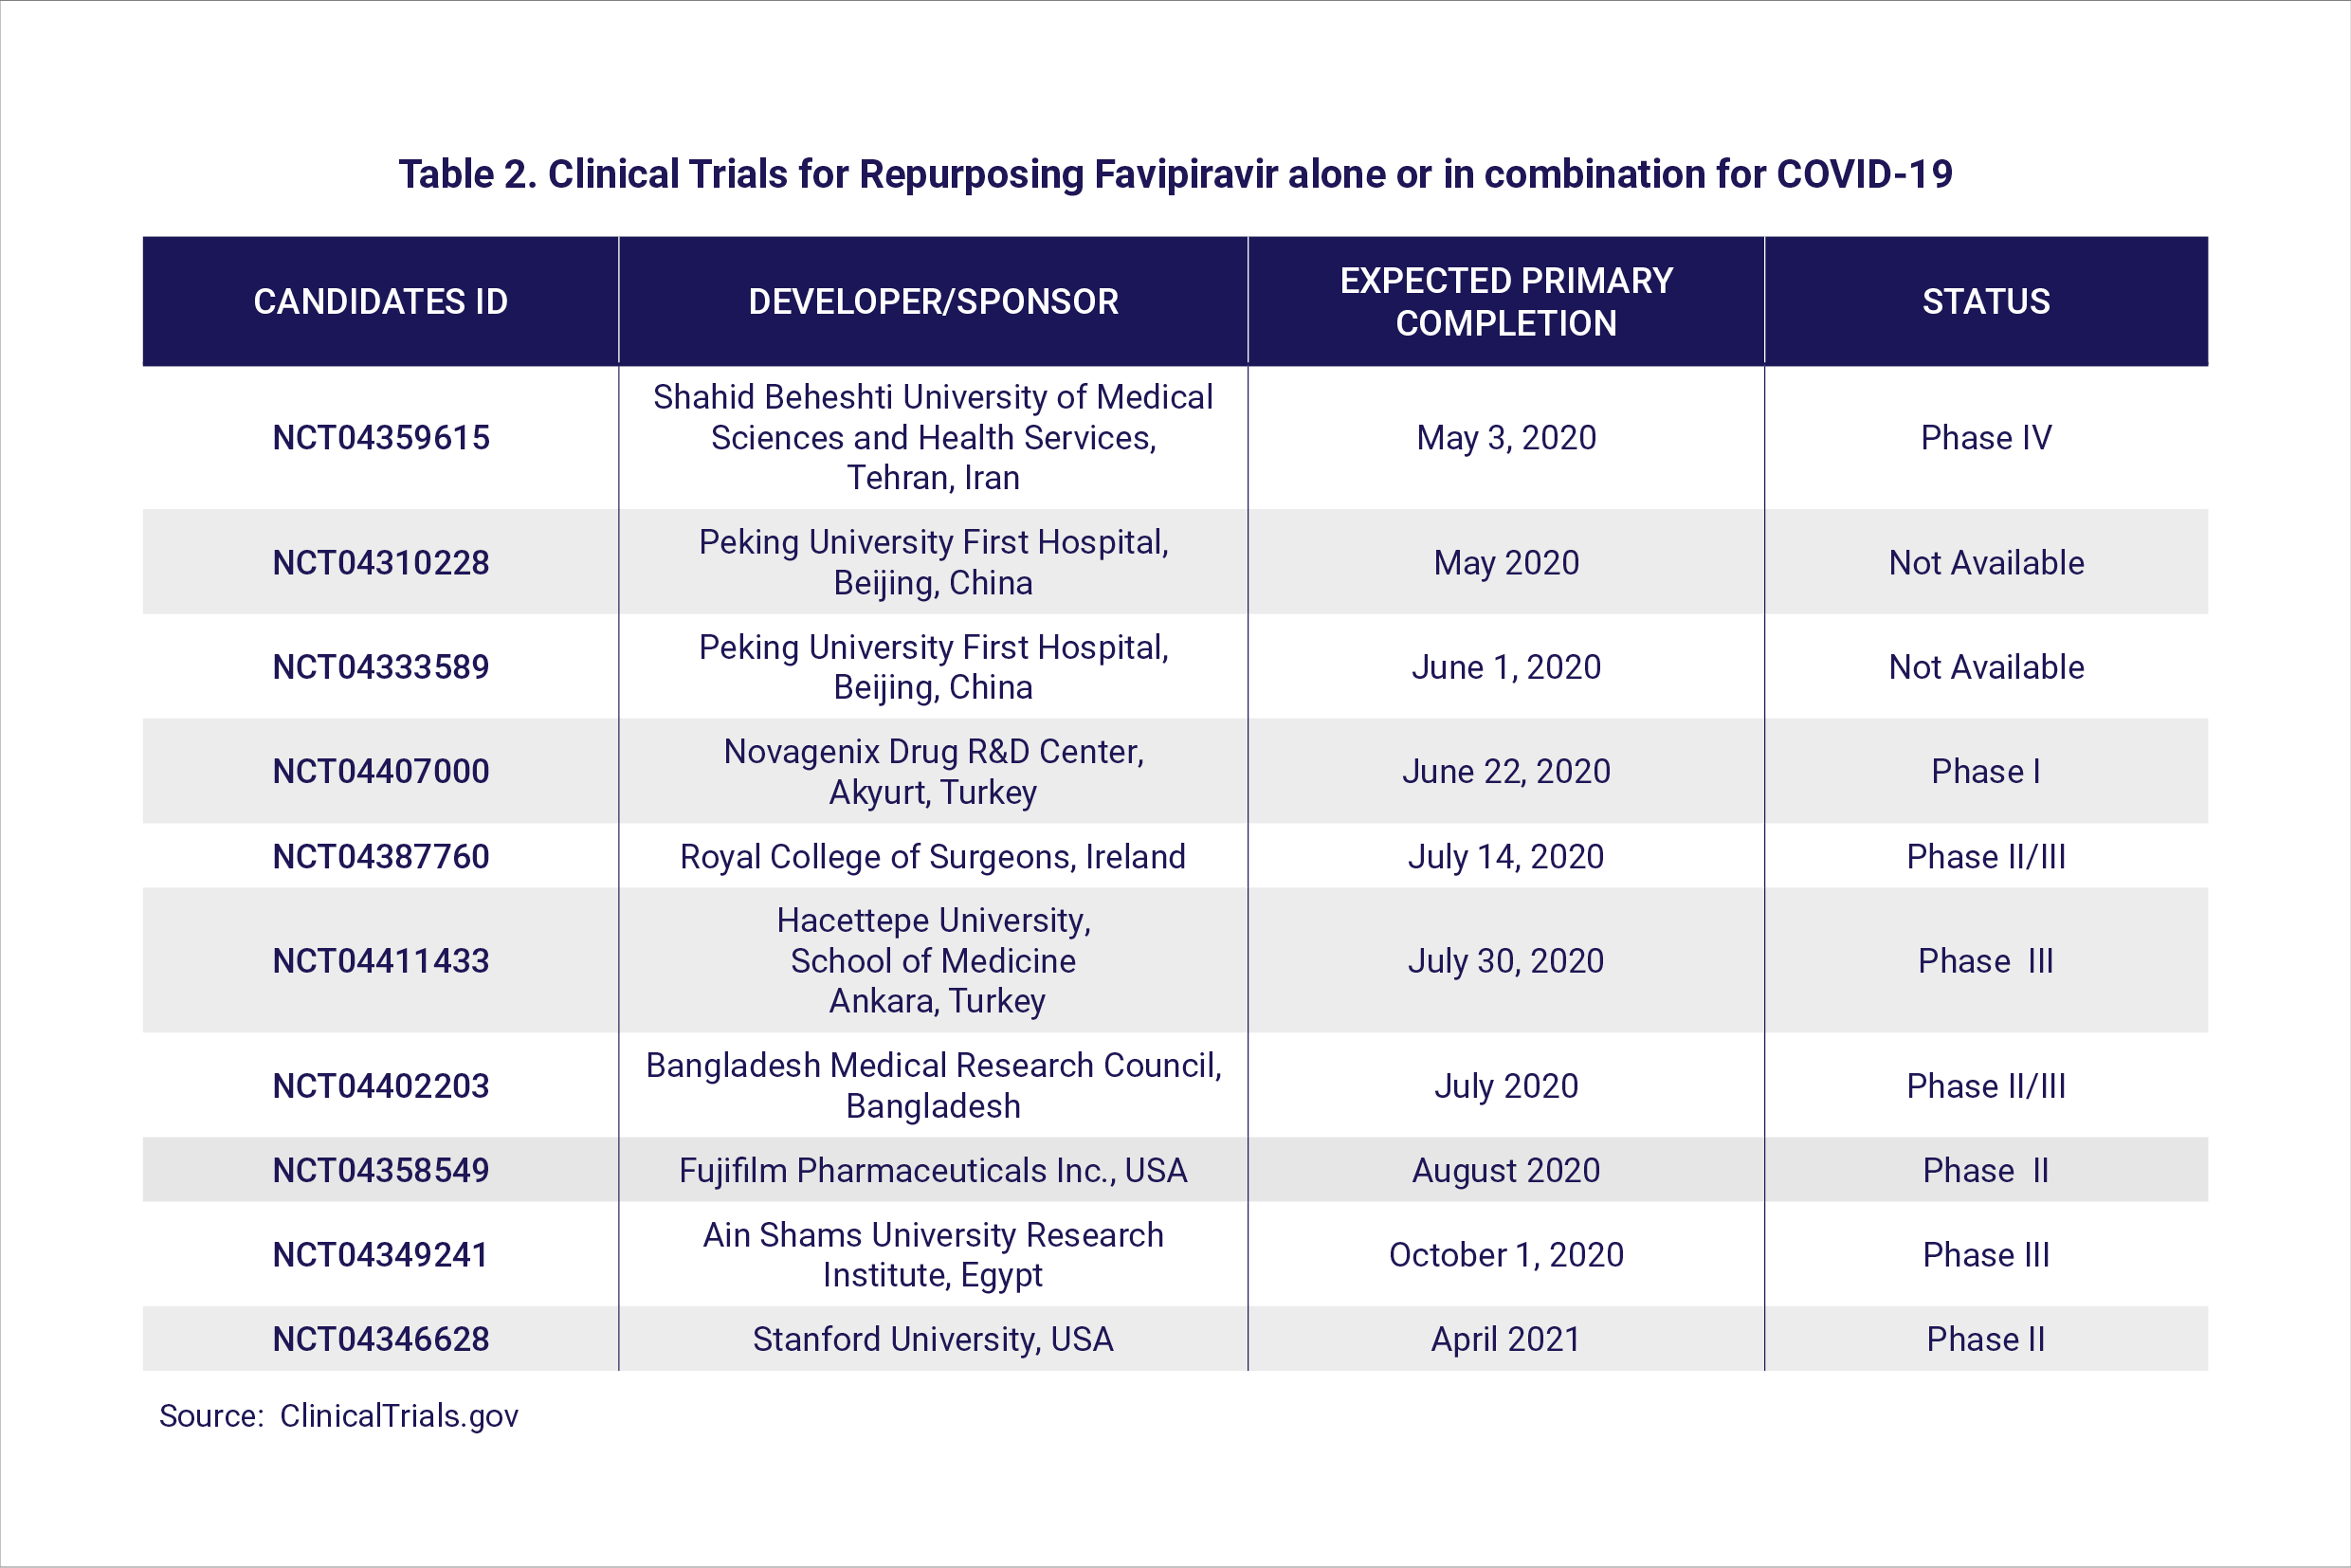 Table 2. Clinical Trials for Repurposing Favipiravir alone or in combination for COVID-19